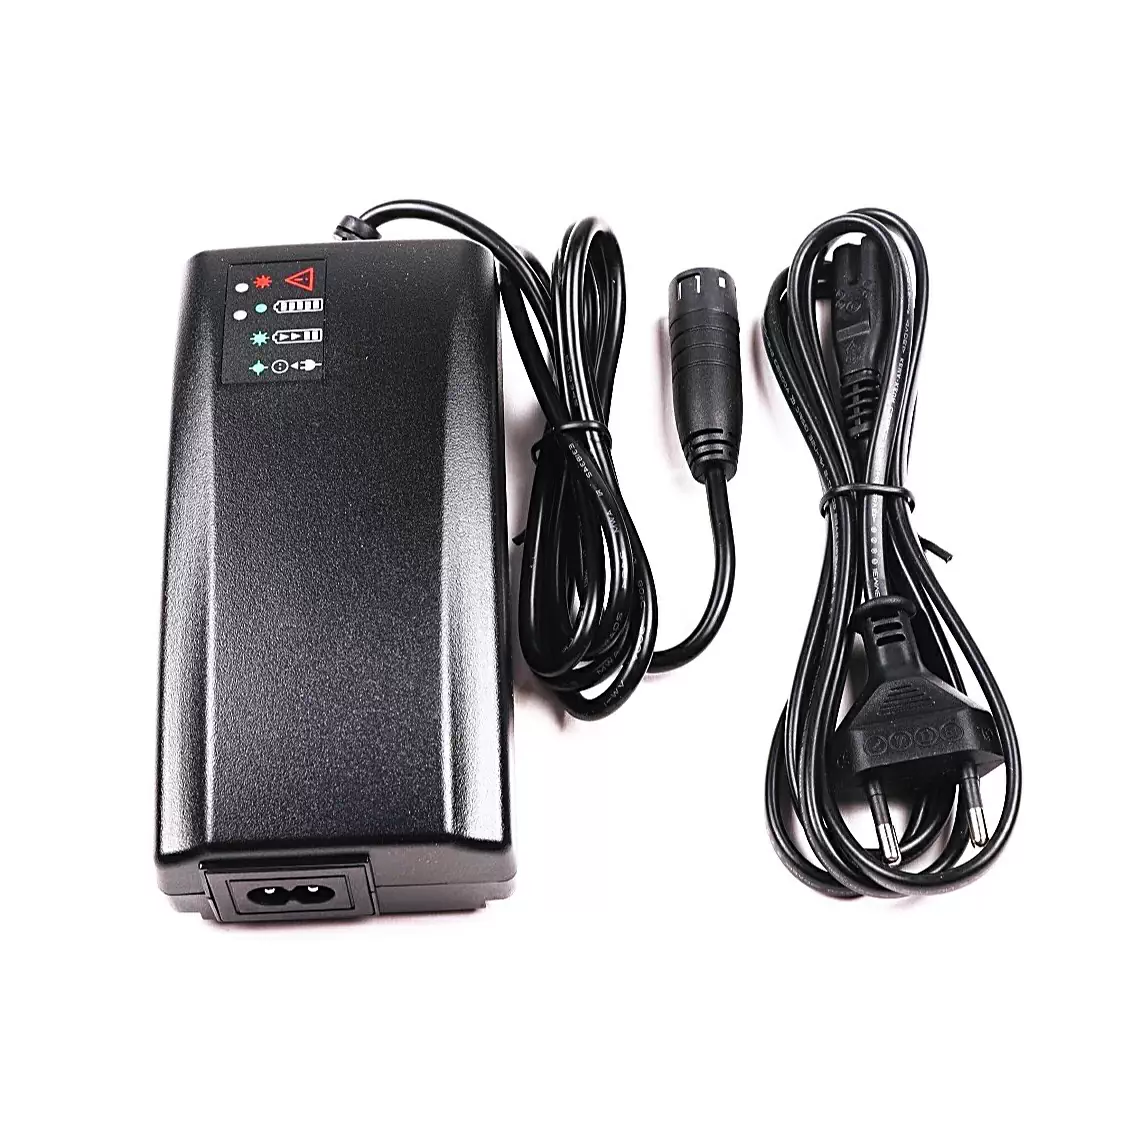 E-bike Fast Charger 2A Battery 240v With EU Plug For Electric Models - image